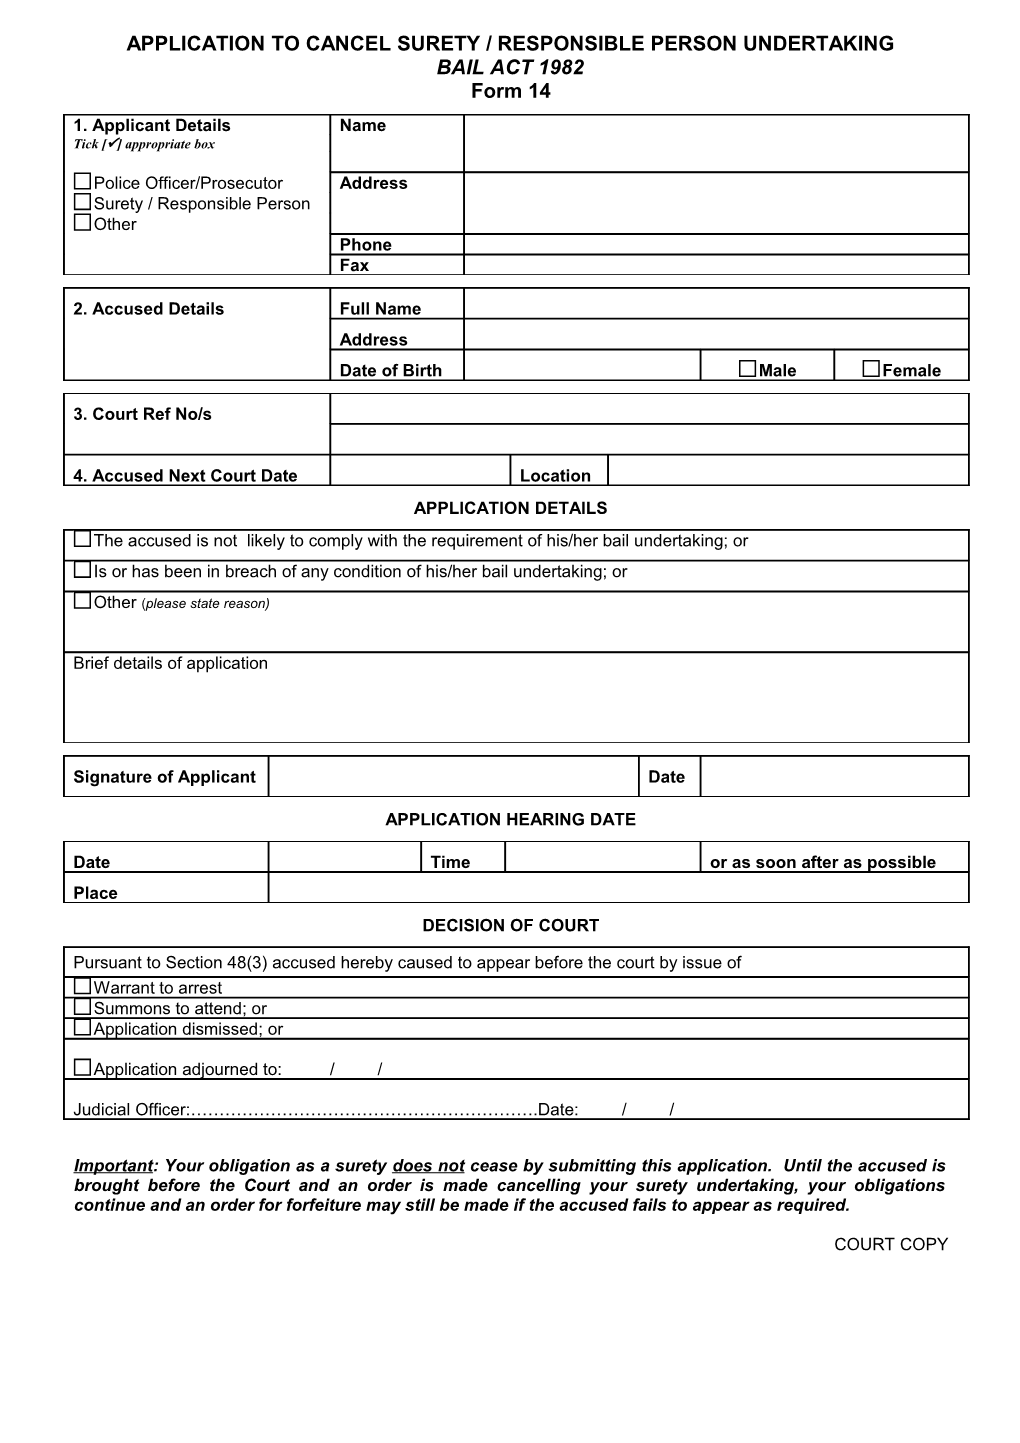 Application to Cancel Surety / Responsible Person Undertaking